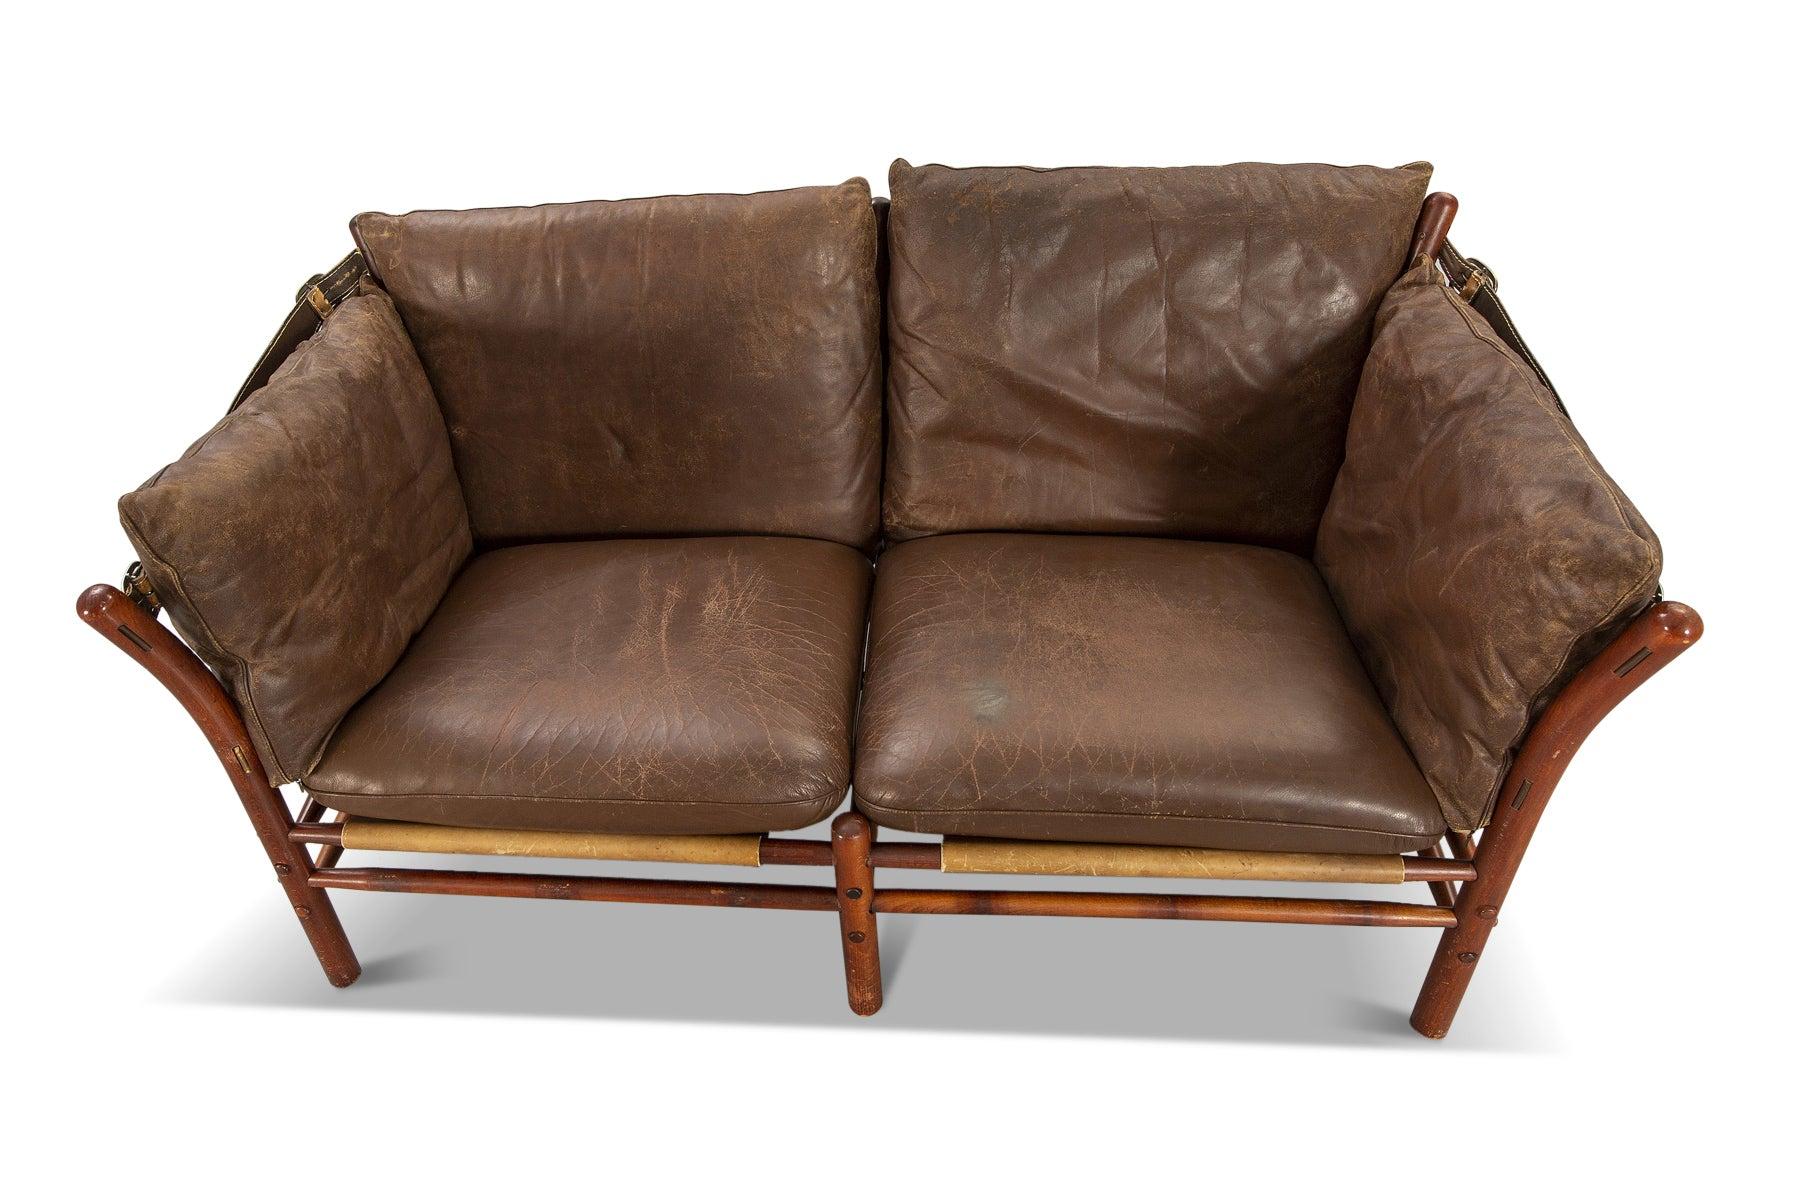 Origin: Sweden
Designer: Arne Norell
Manufacturer: Norell Møbler AB
Era: 1960s
Materials: Beech, leather
Measurements: 58.75? wide x 31.5? deep

Condition: In excellent original condition with some vintage wear to the cushions.